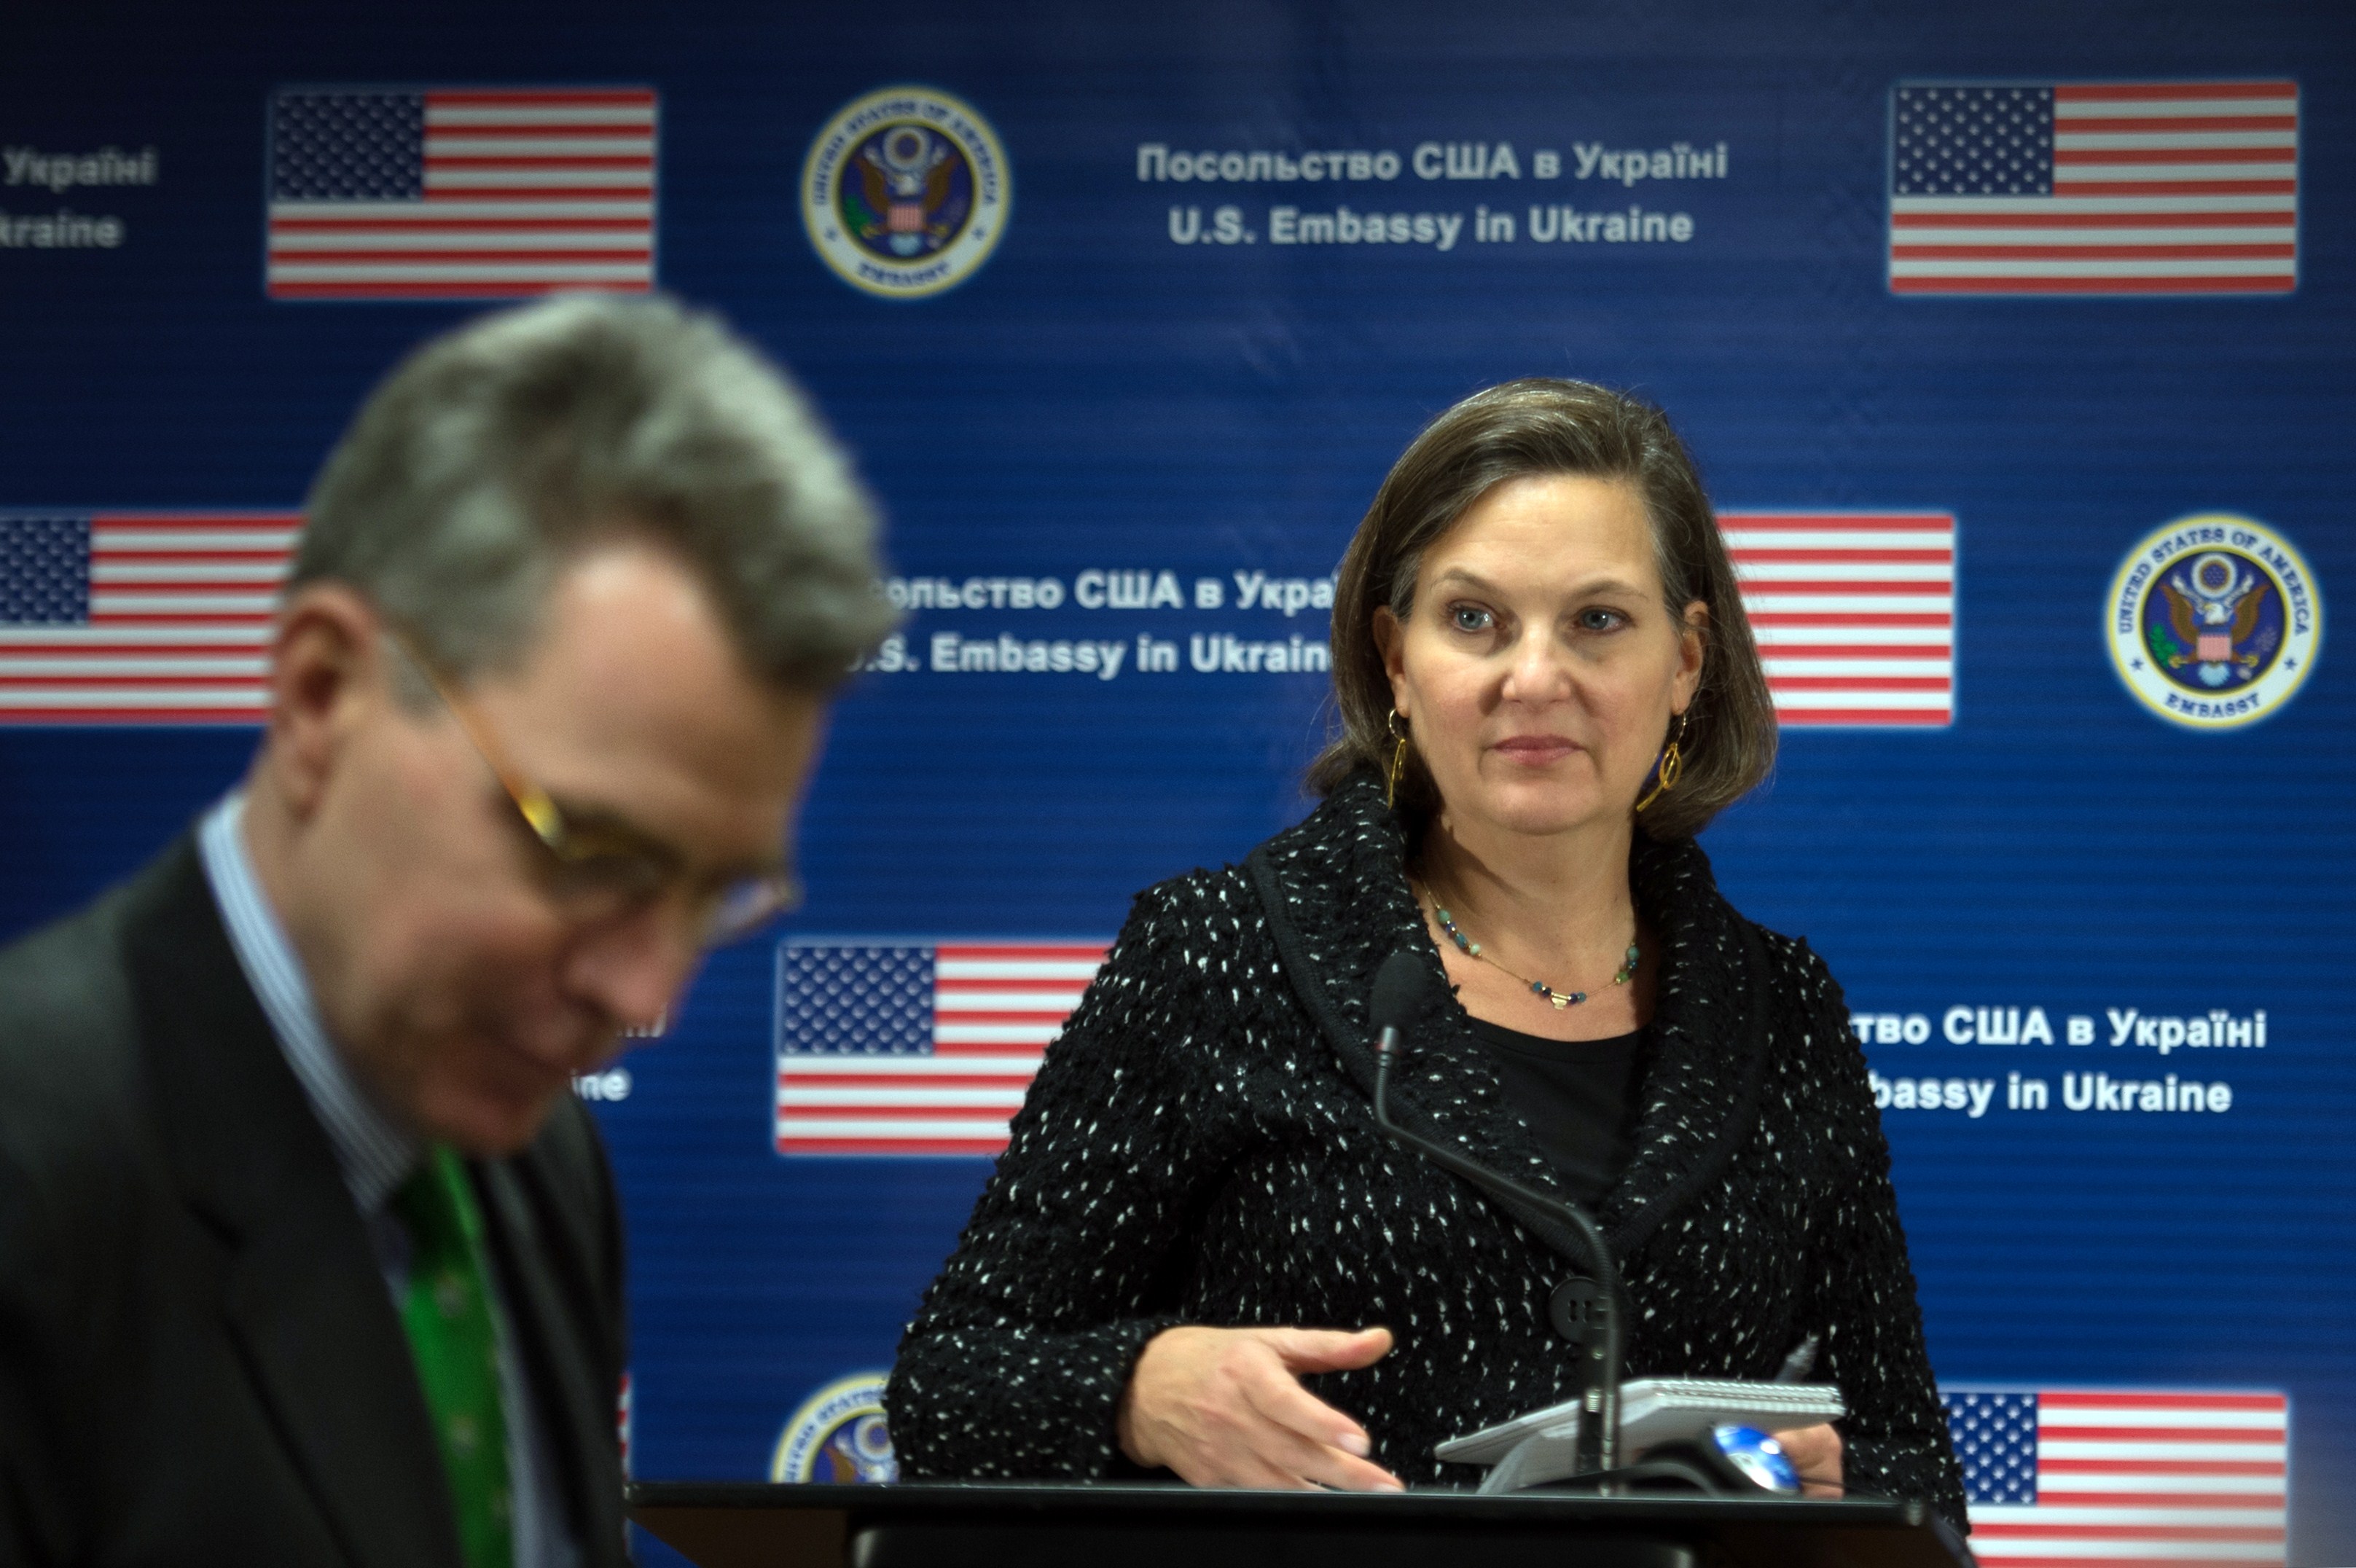 US State Department Assistant Secretary of State for European and Eurasian Affairs Victoria Nuland and US ambassador to Ukraine Geoffrey R. Pyatt  arrive to hold a press conference at the US Embassy in Kiev  on February 7, 2014. (Martin Bureau&mdash;AFP/Getty Images)